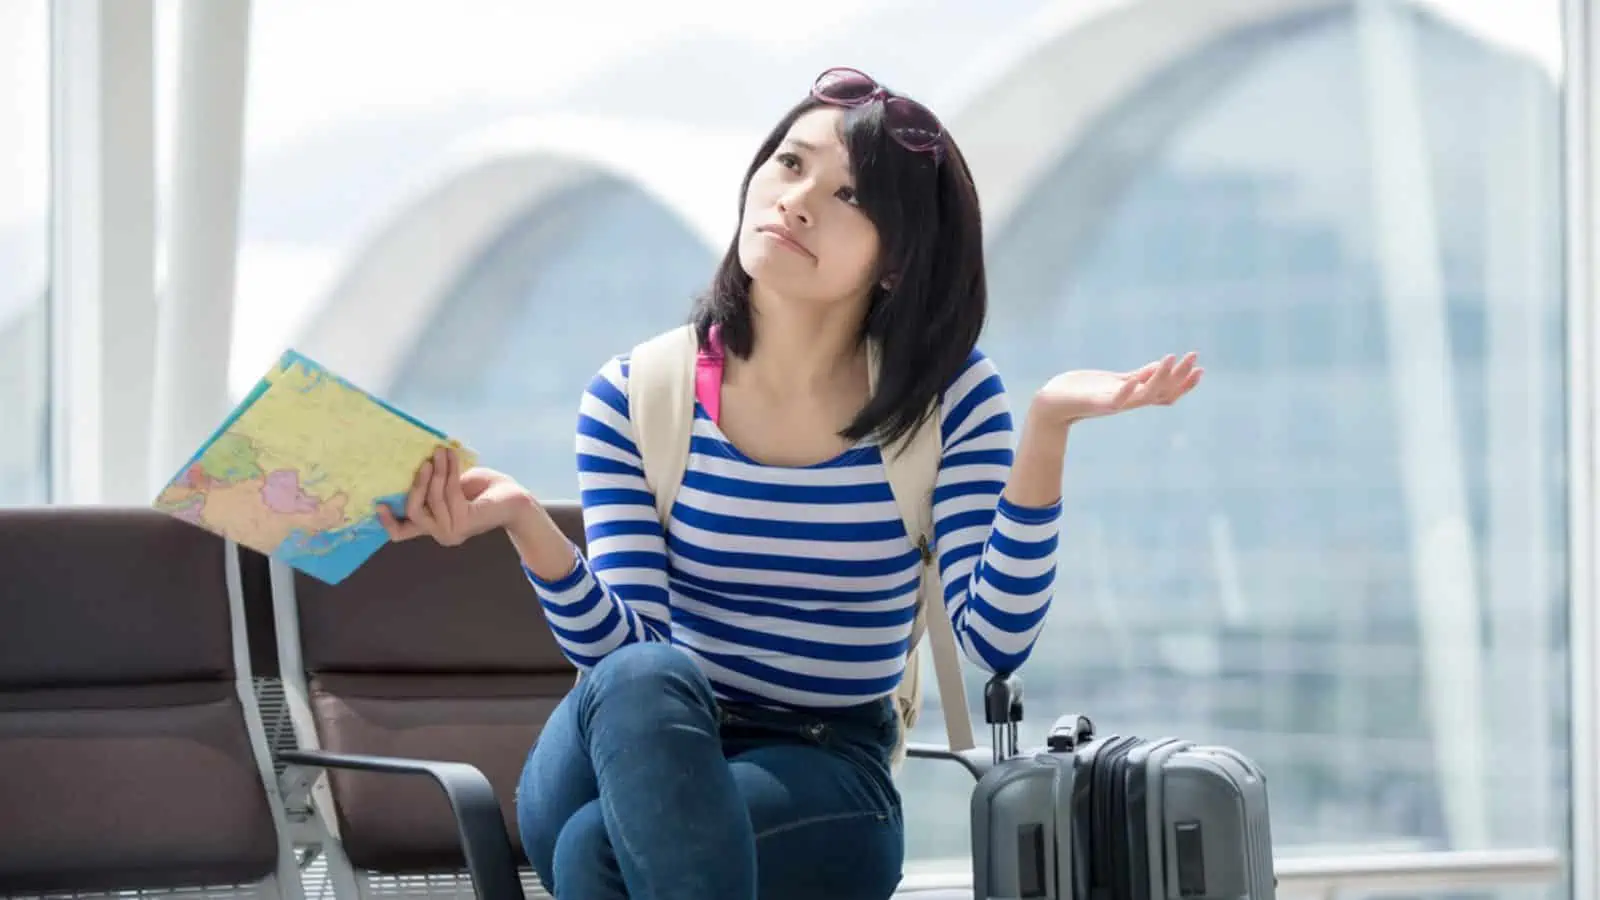 Confused woman traveler holding map